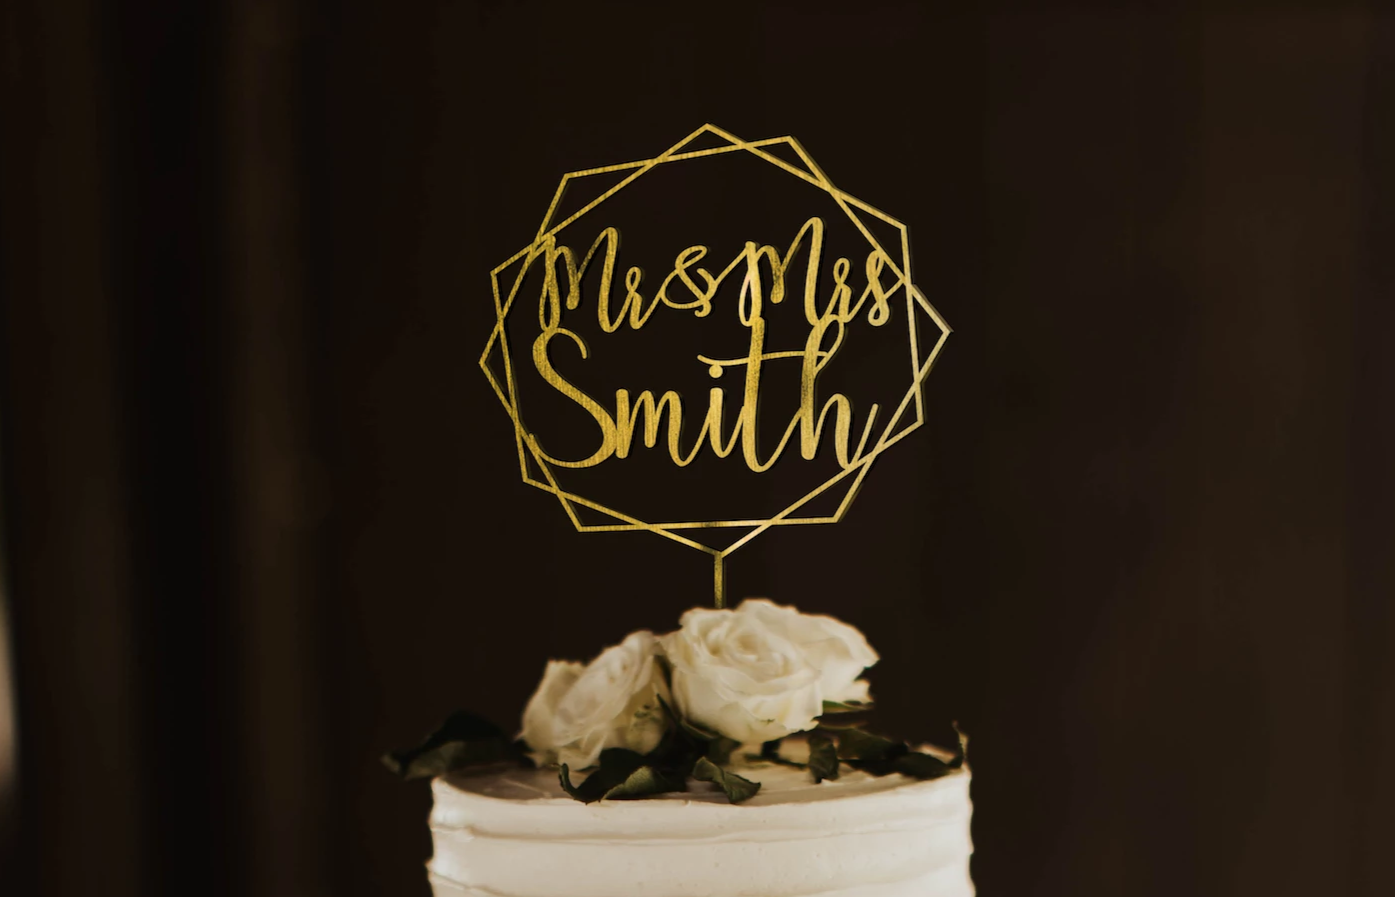 calligraphy personalized golden hexagon wreath style cake topper made of wood on top of the white simple wedding cake. 